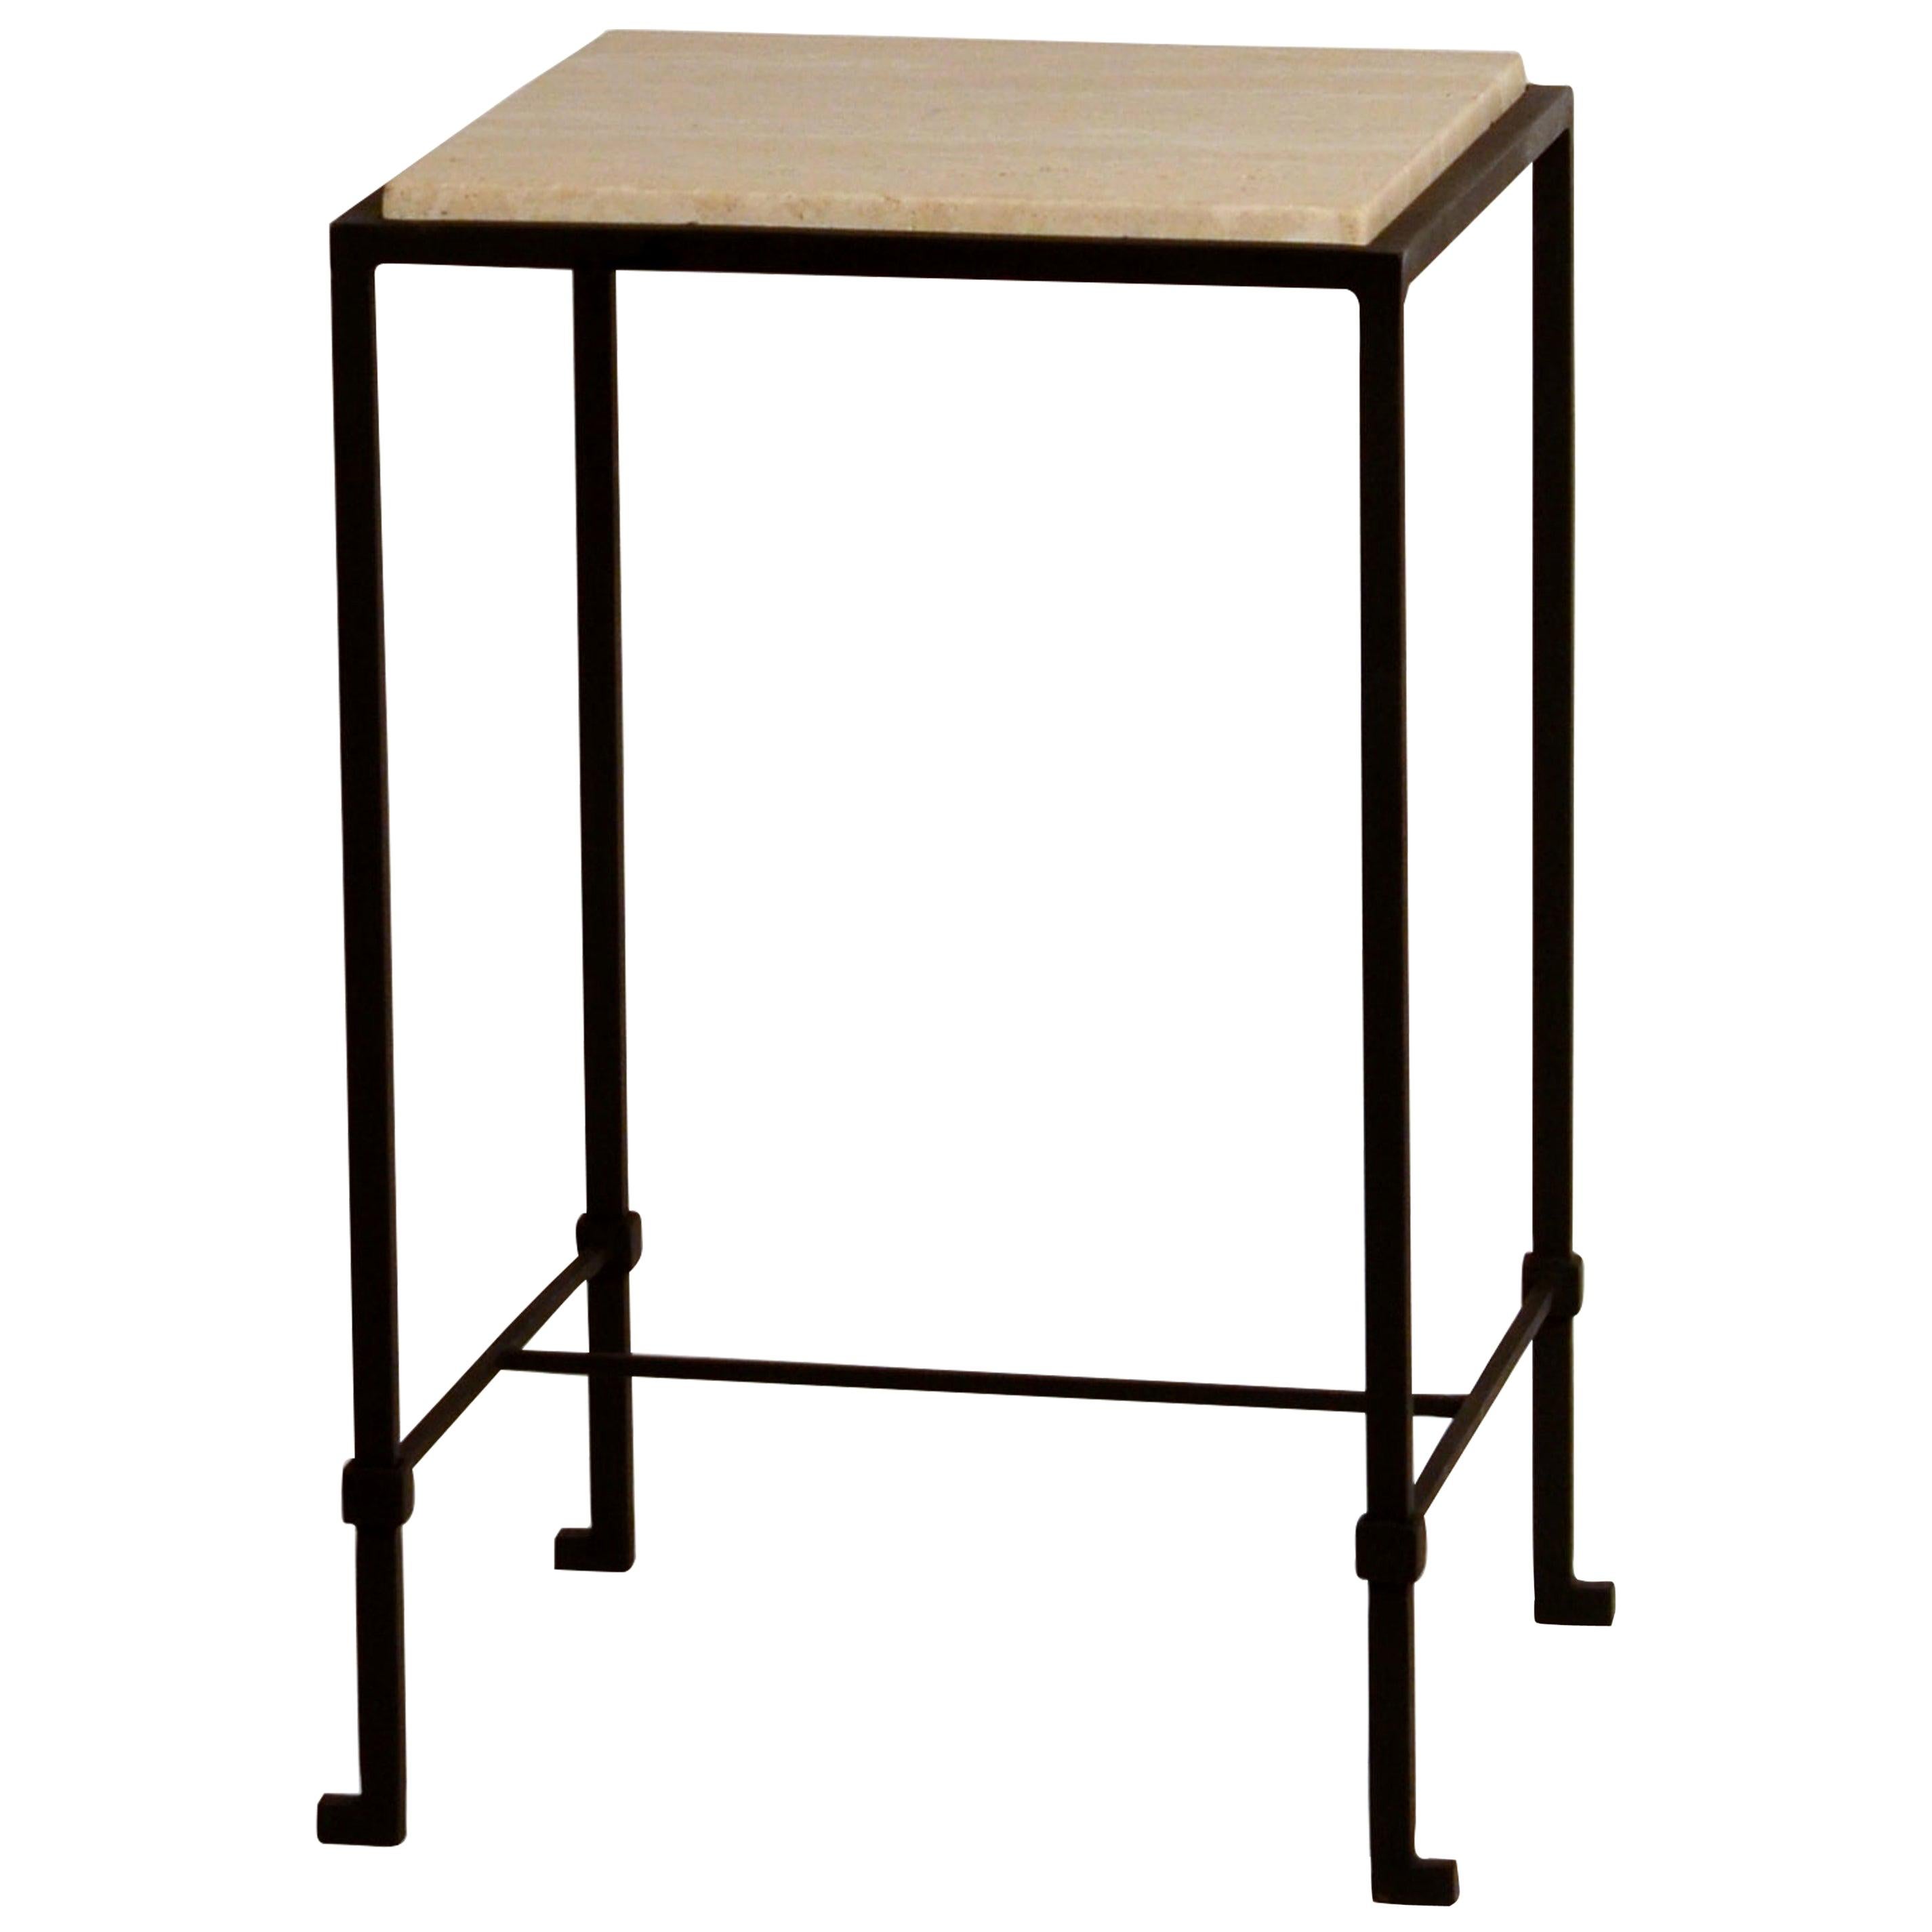 'Diagramme' Wrought Iron and Honed Travertine Drinks Table by Design Frères For Sale